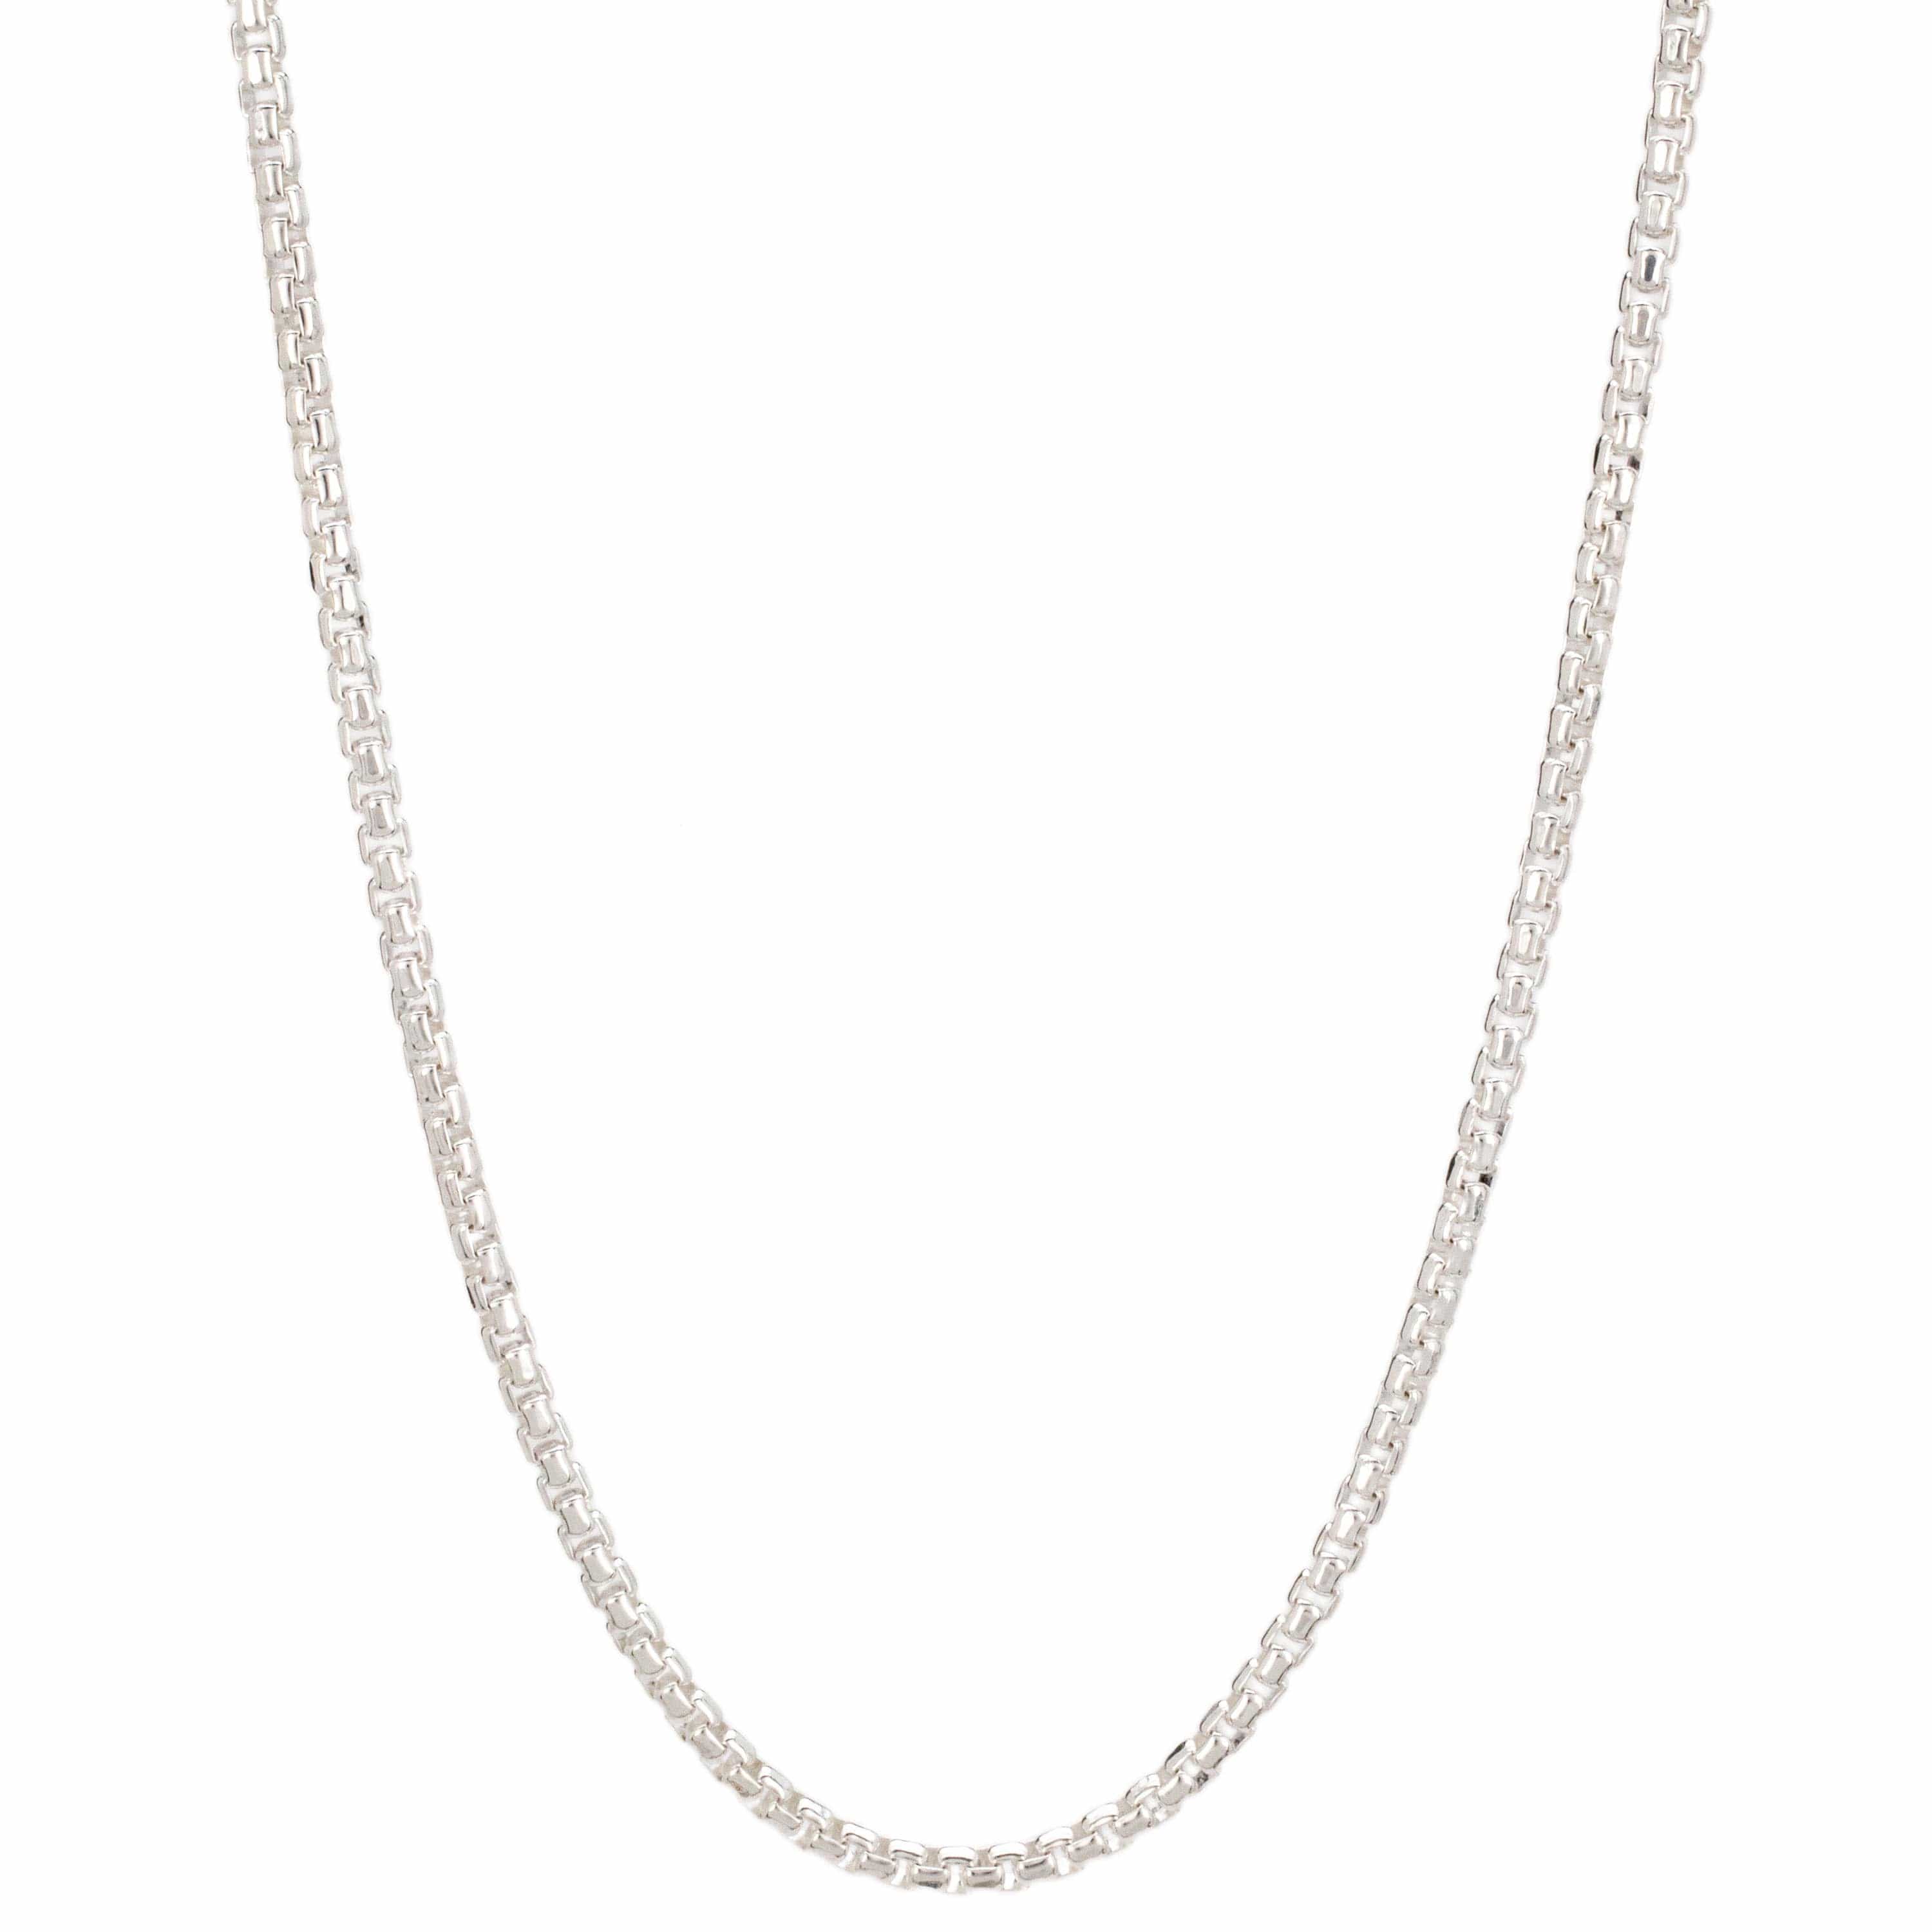 Kalifano Sterling Silver Chains 18" Italian Sterling Silver Box Chain Necklace 2.5mm SC-HRB050-18